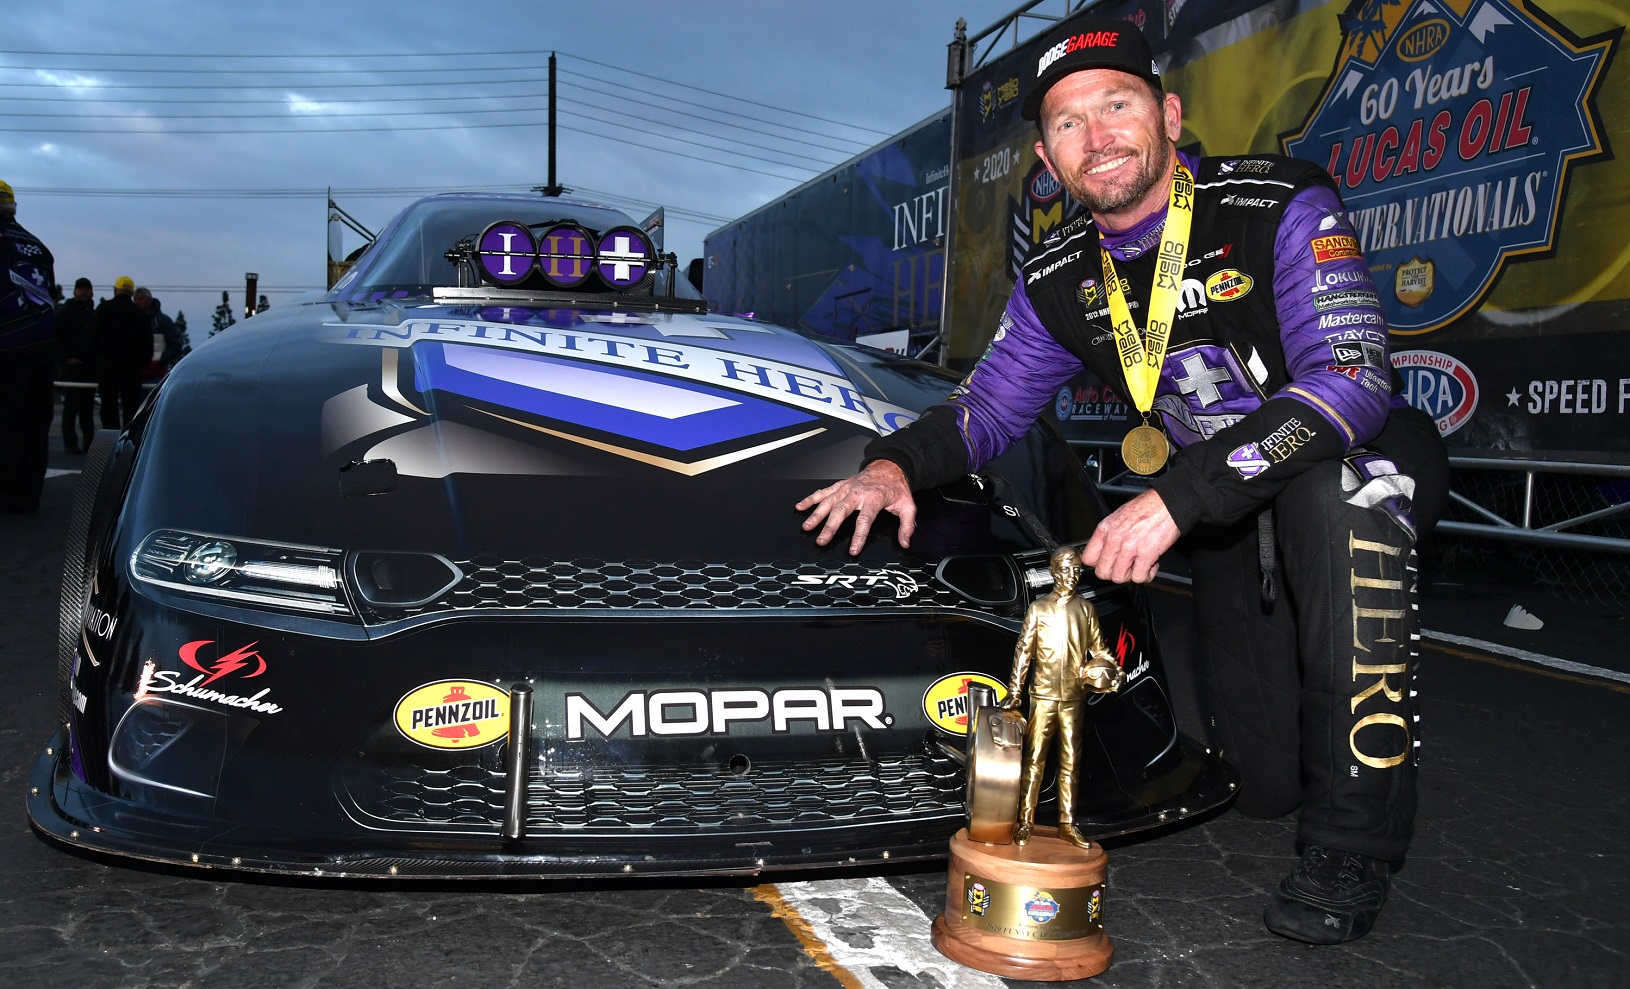 Jack Beckman kneeling in front of his Funny Car with the Wally trophy he won at NHRA Winternationals